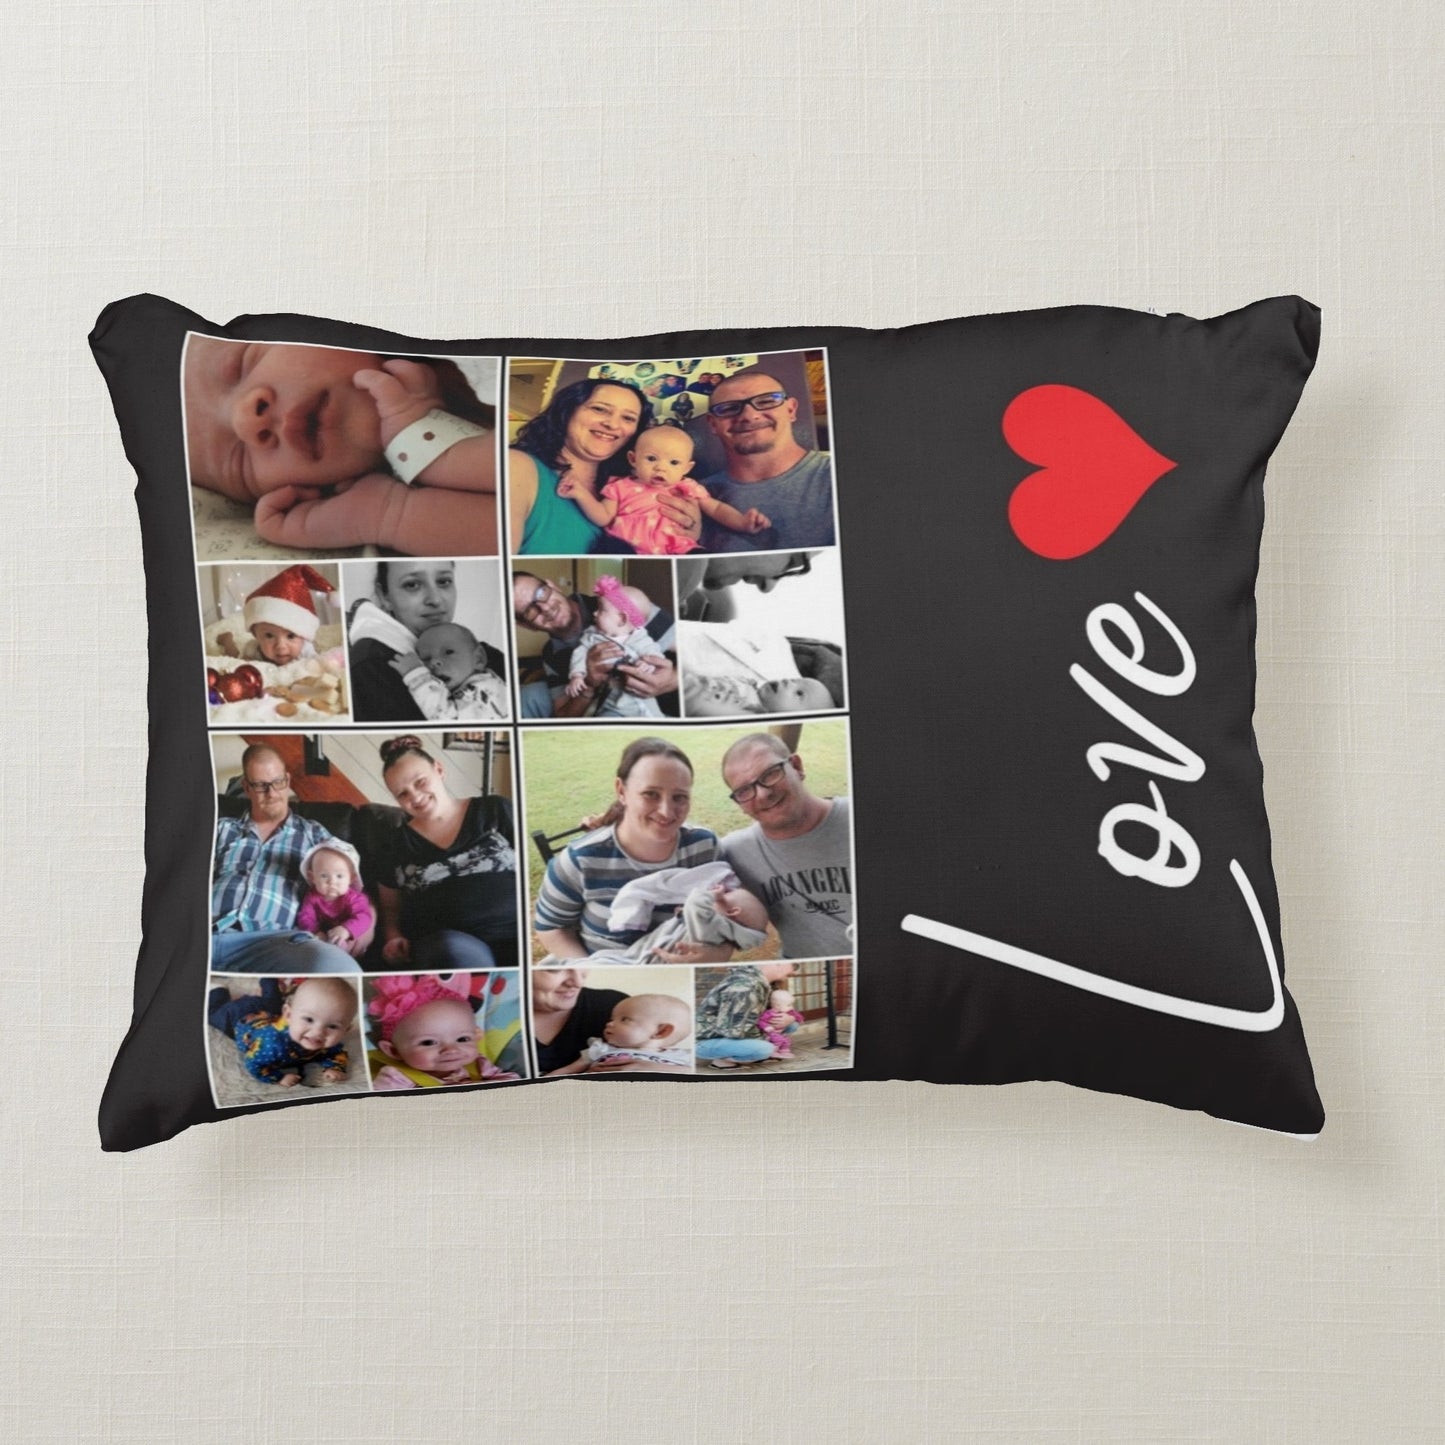 Personalised Pillows